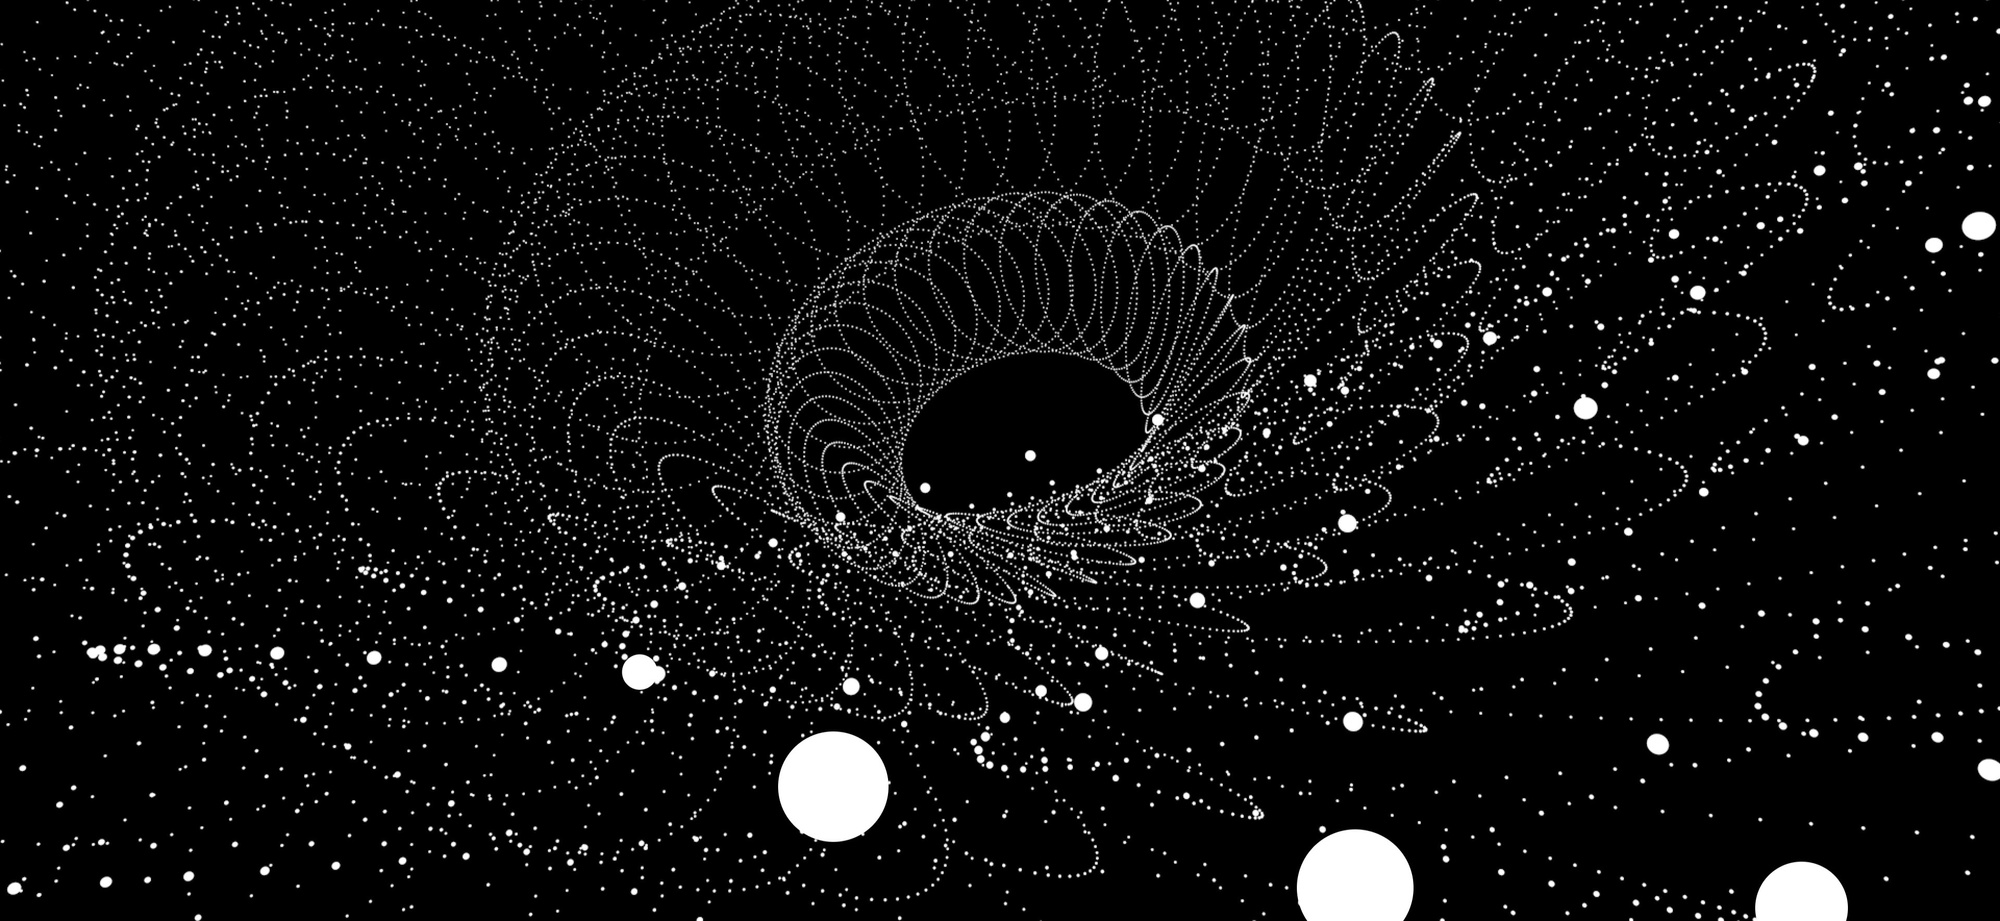 Large spiral of white dots on black background